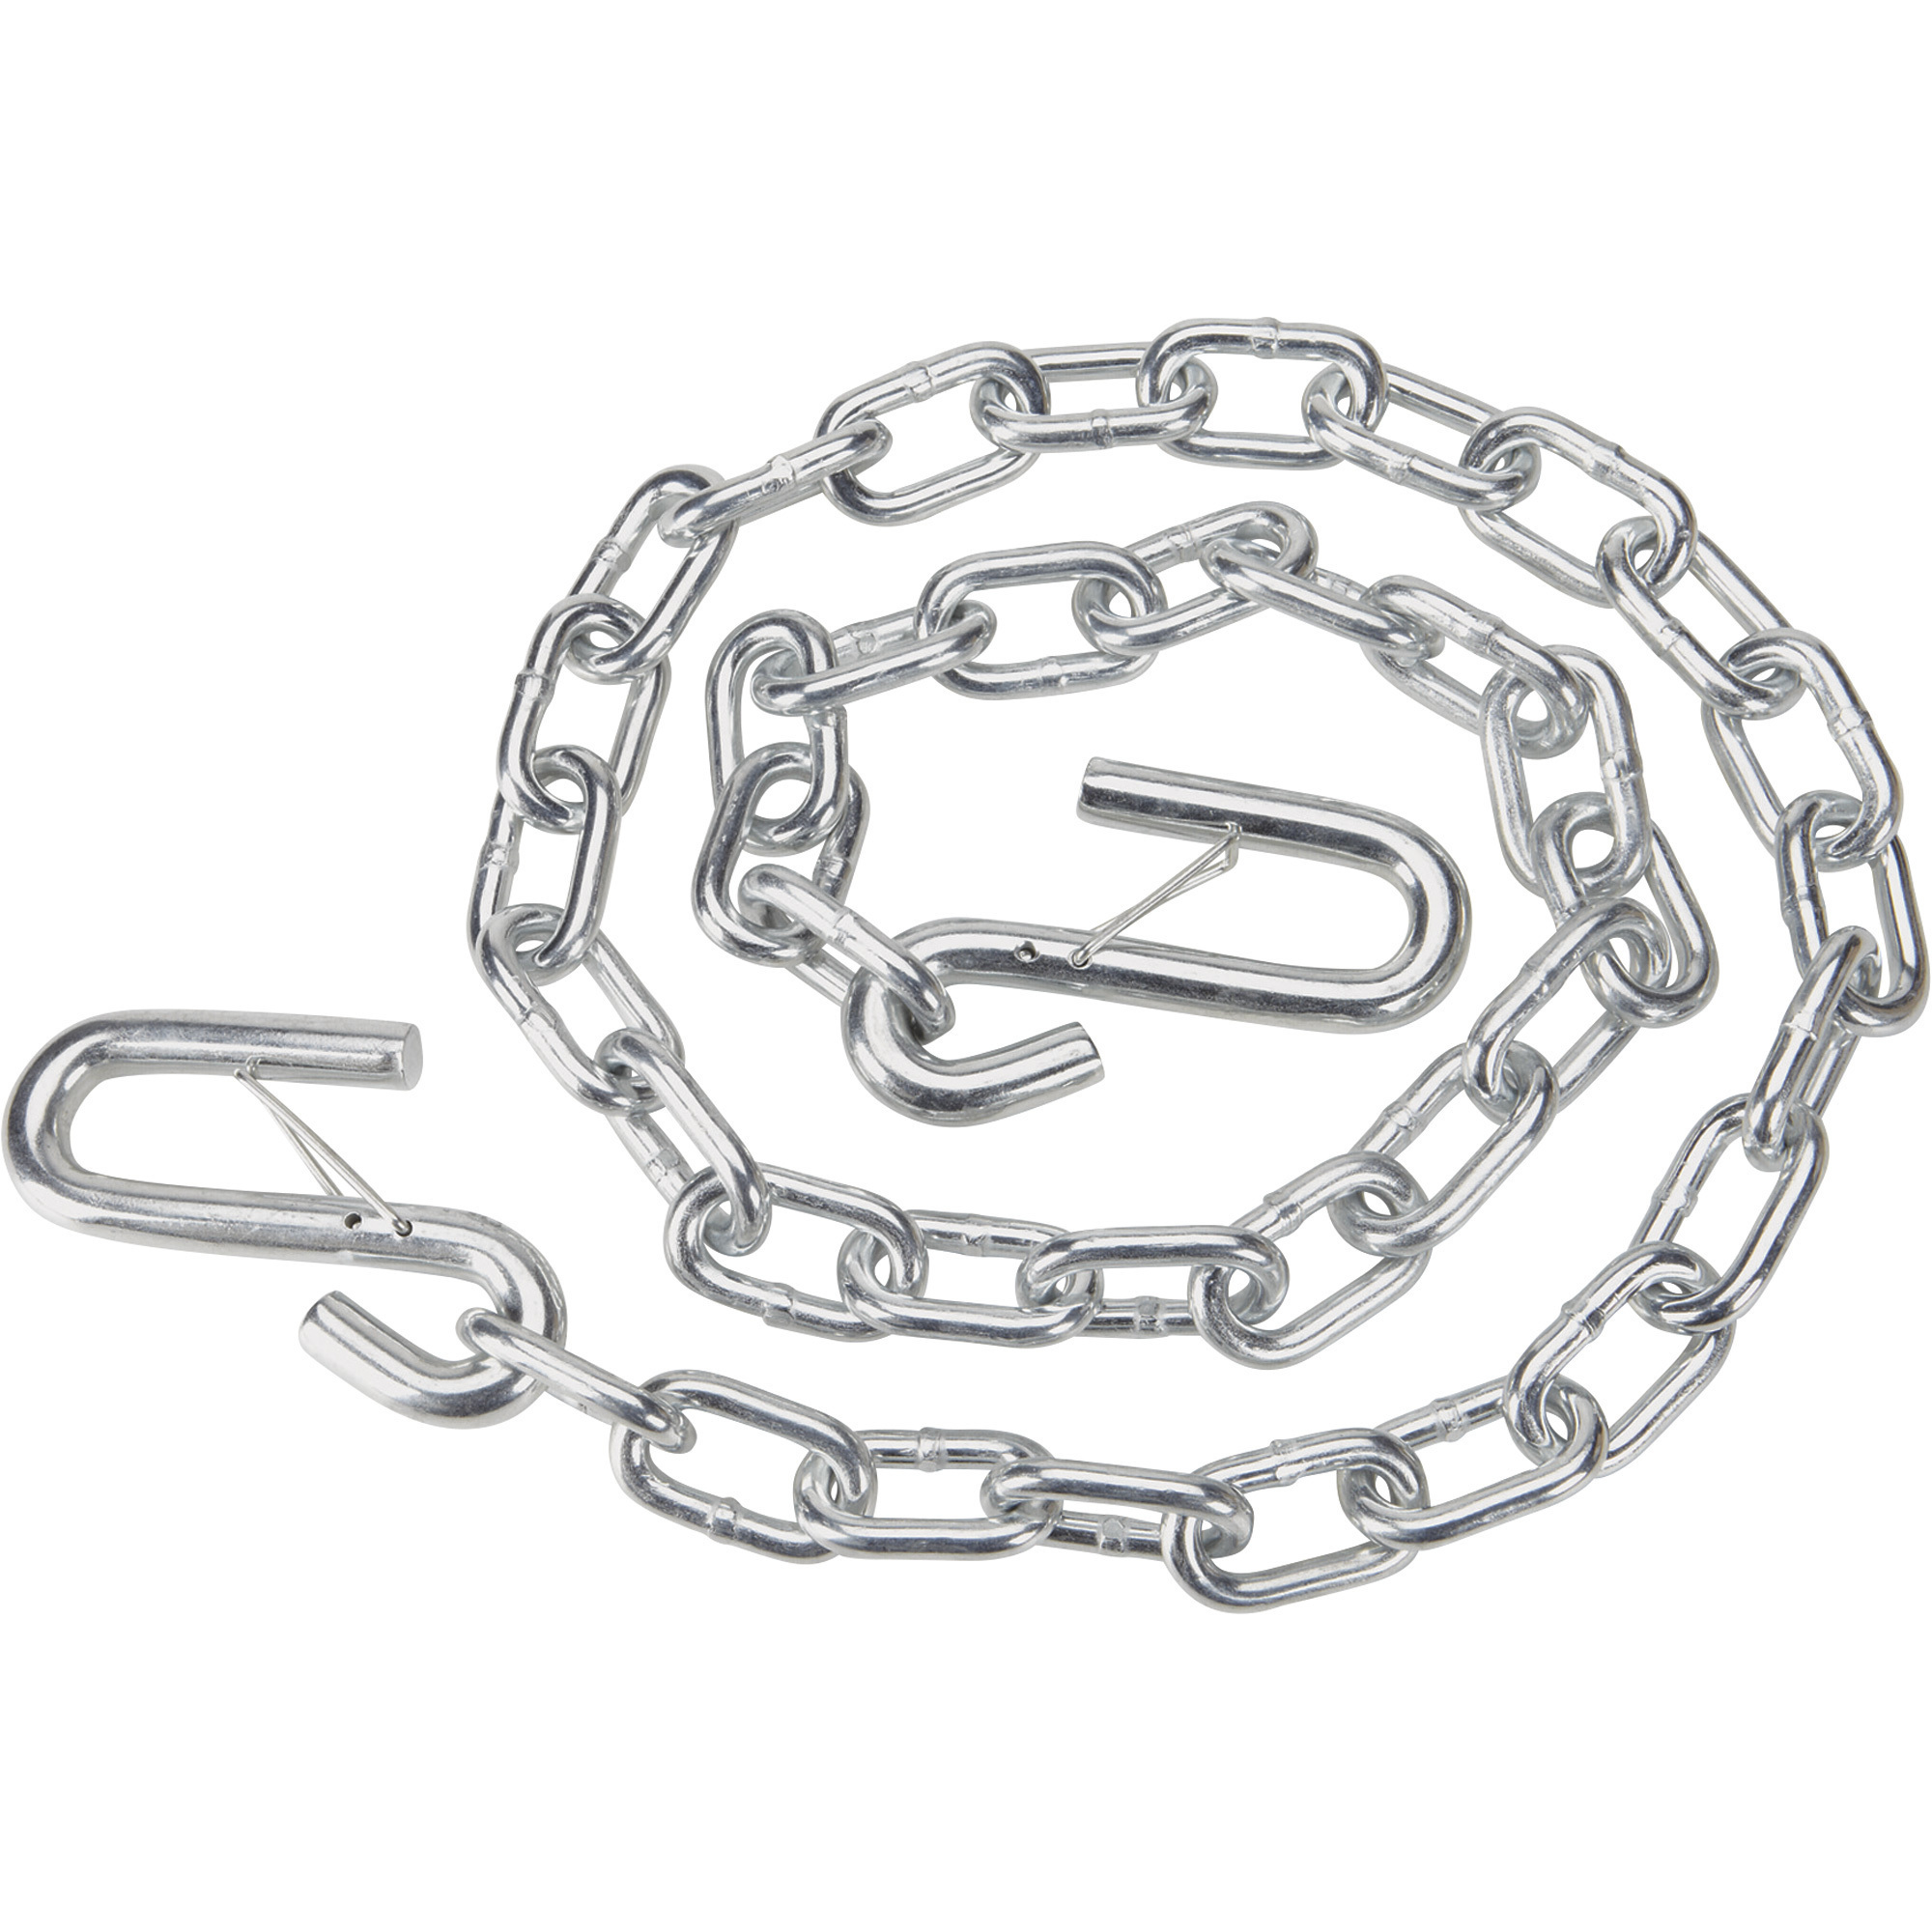 Ultra-Tow Safety Tow Chain with S-Hook, 9/32Inch x 54Inch Chain, 5000-Lb. Capacity